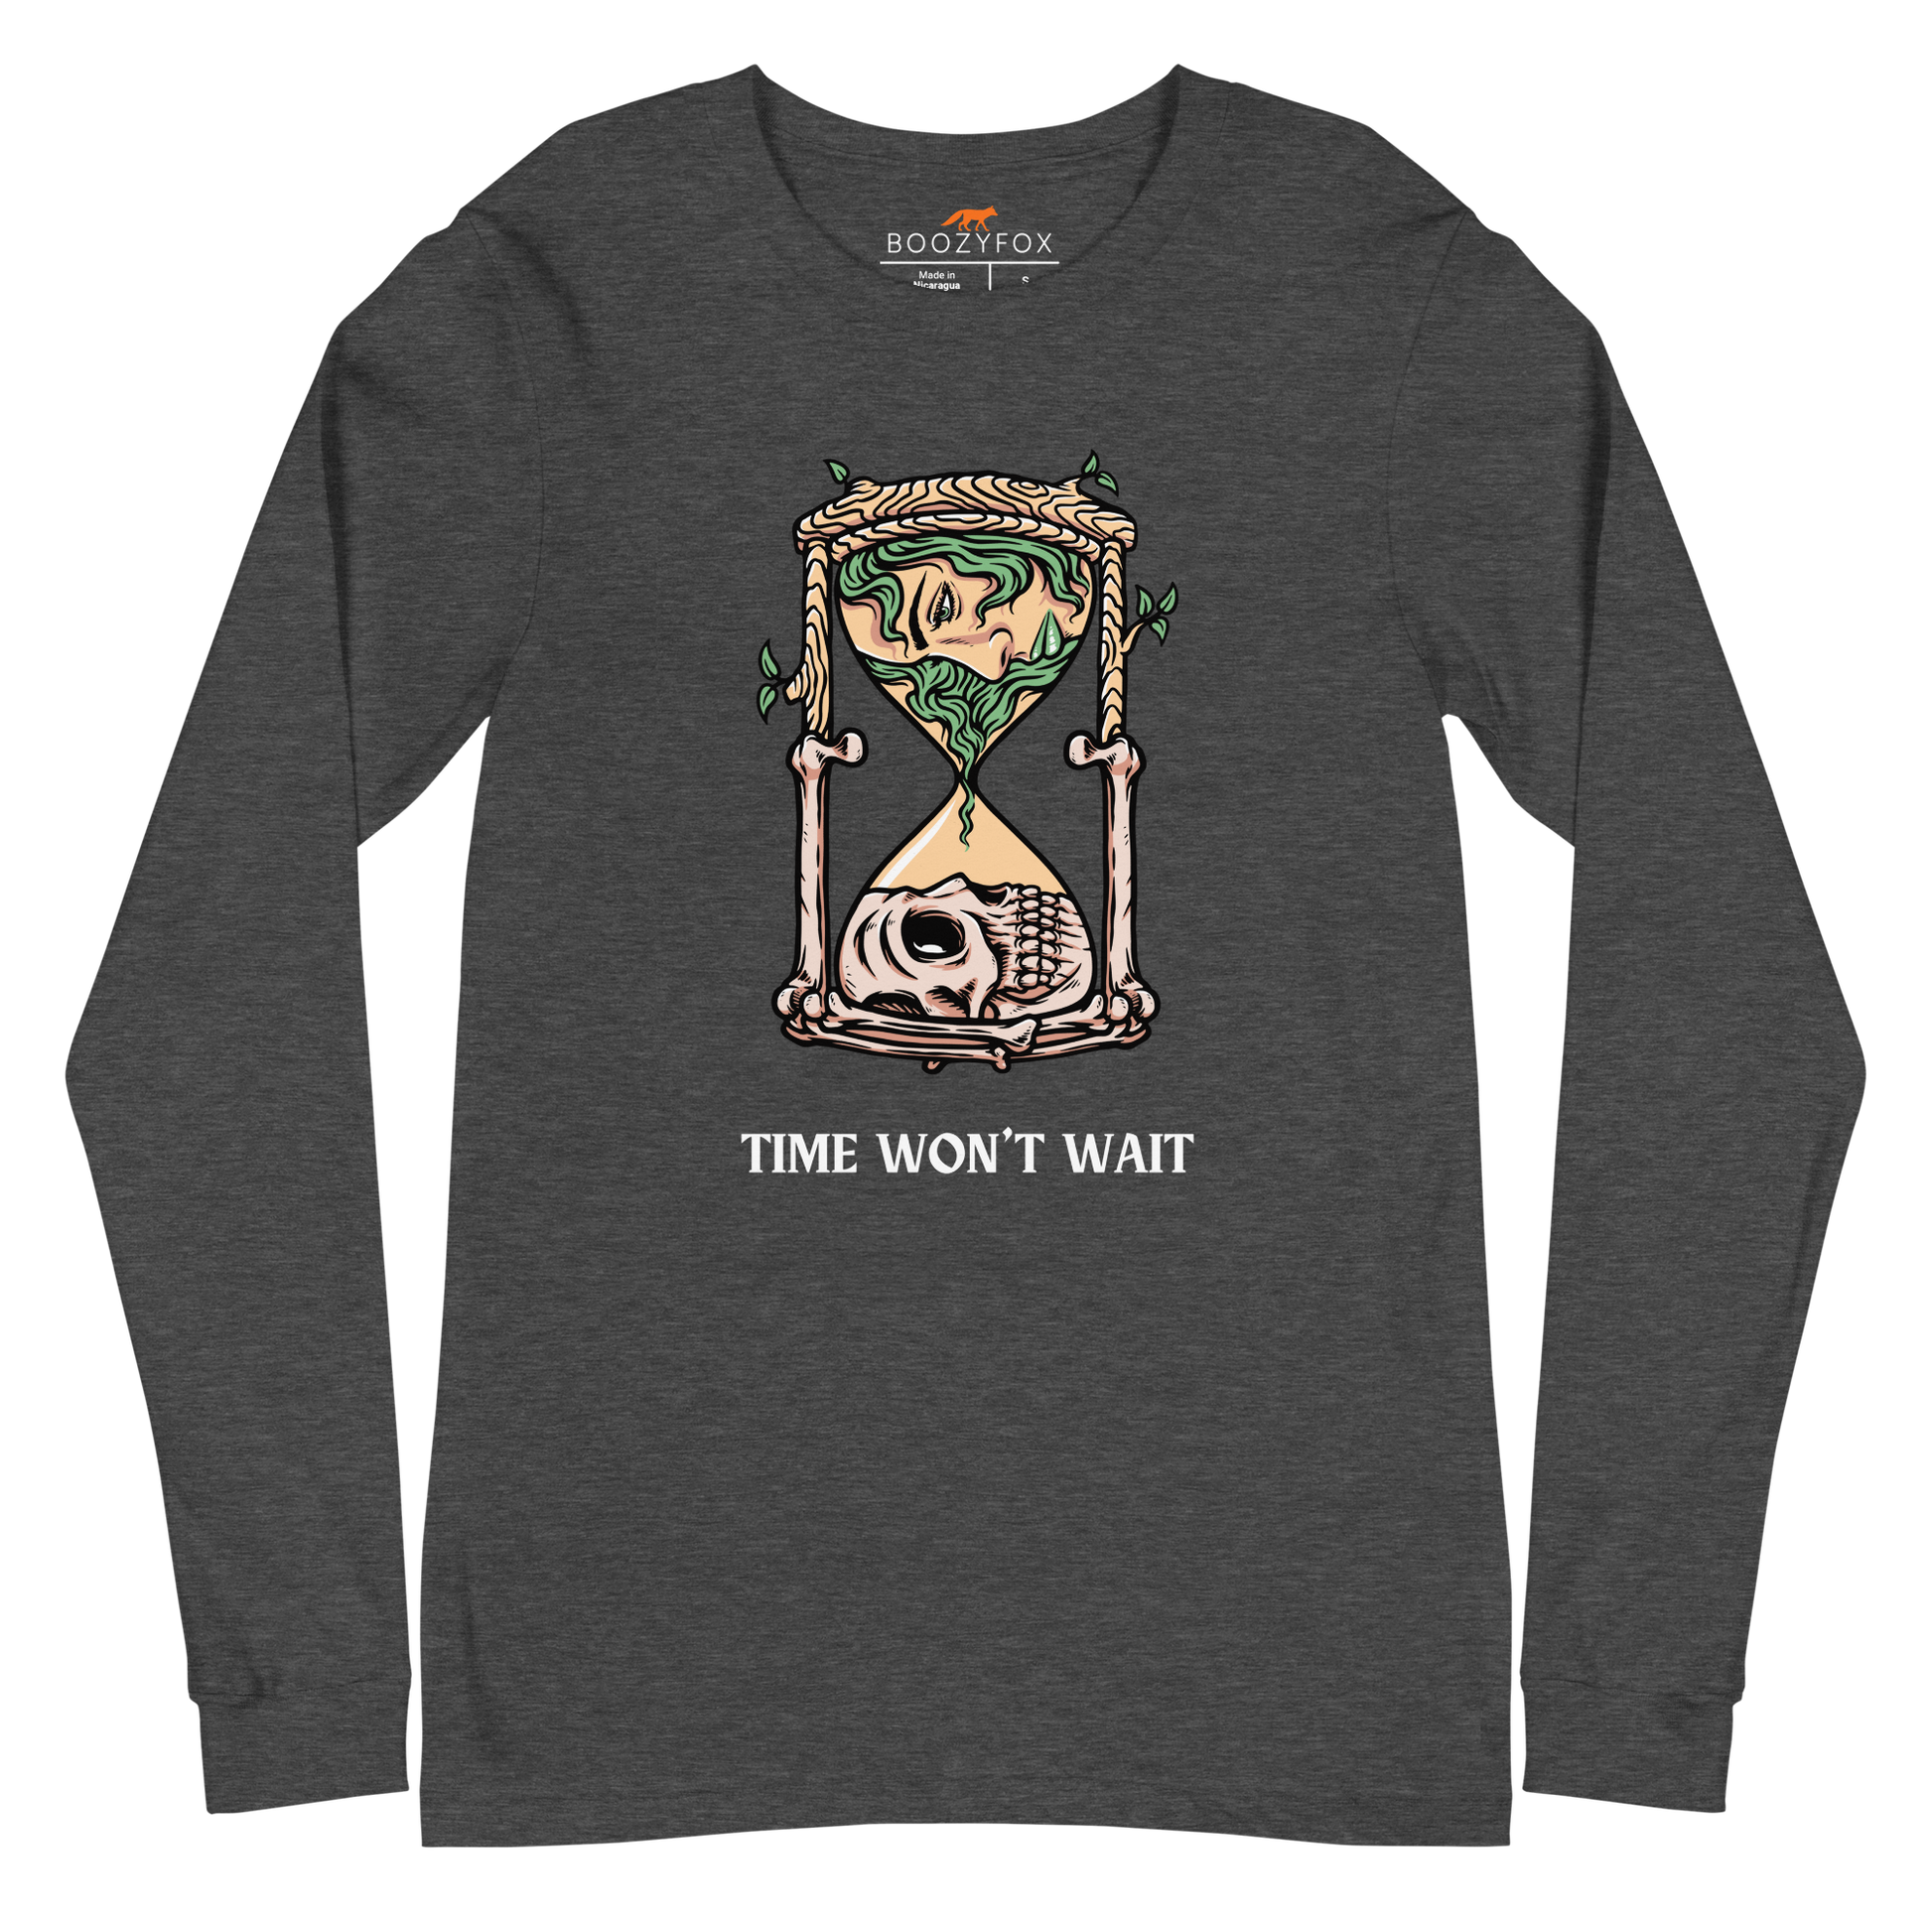 Dark Grey Heather Hourglass Long Sleeve Tee featuring a captivating Time Won't Wait graphic on the chest - Cool Hourglass Long Sleeve Graphic Tees - Boozy Fox